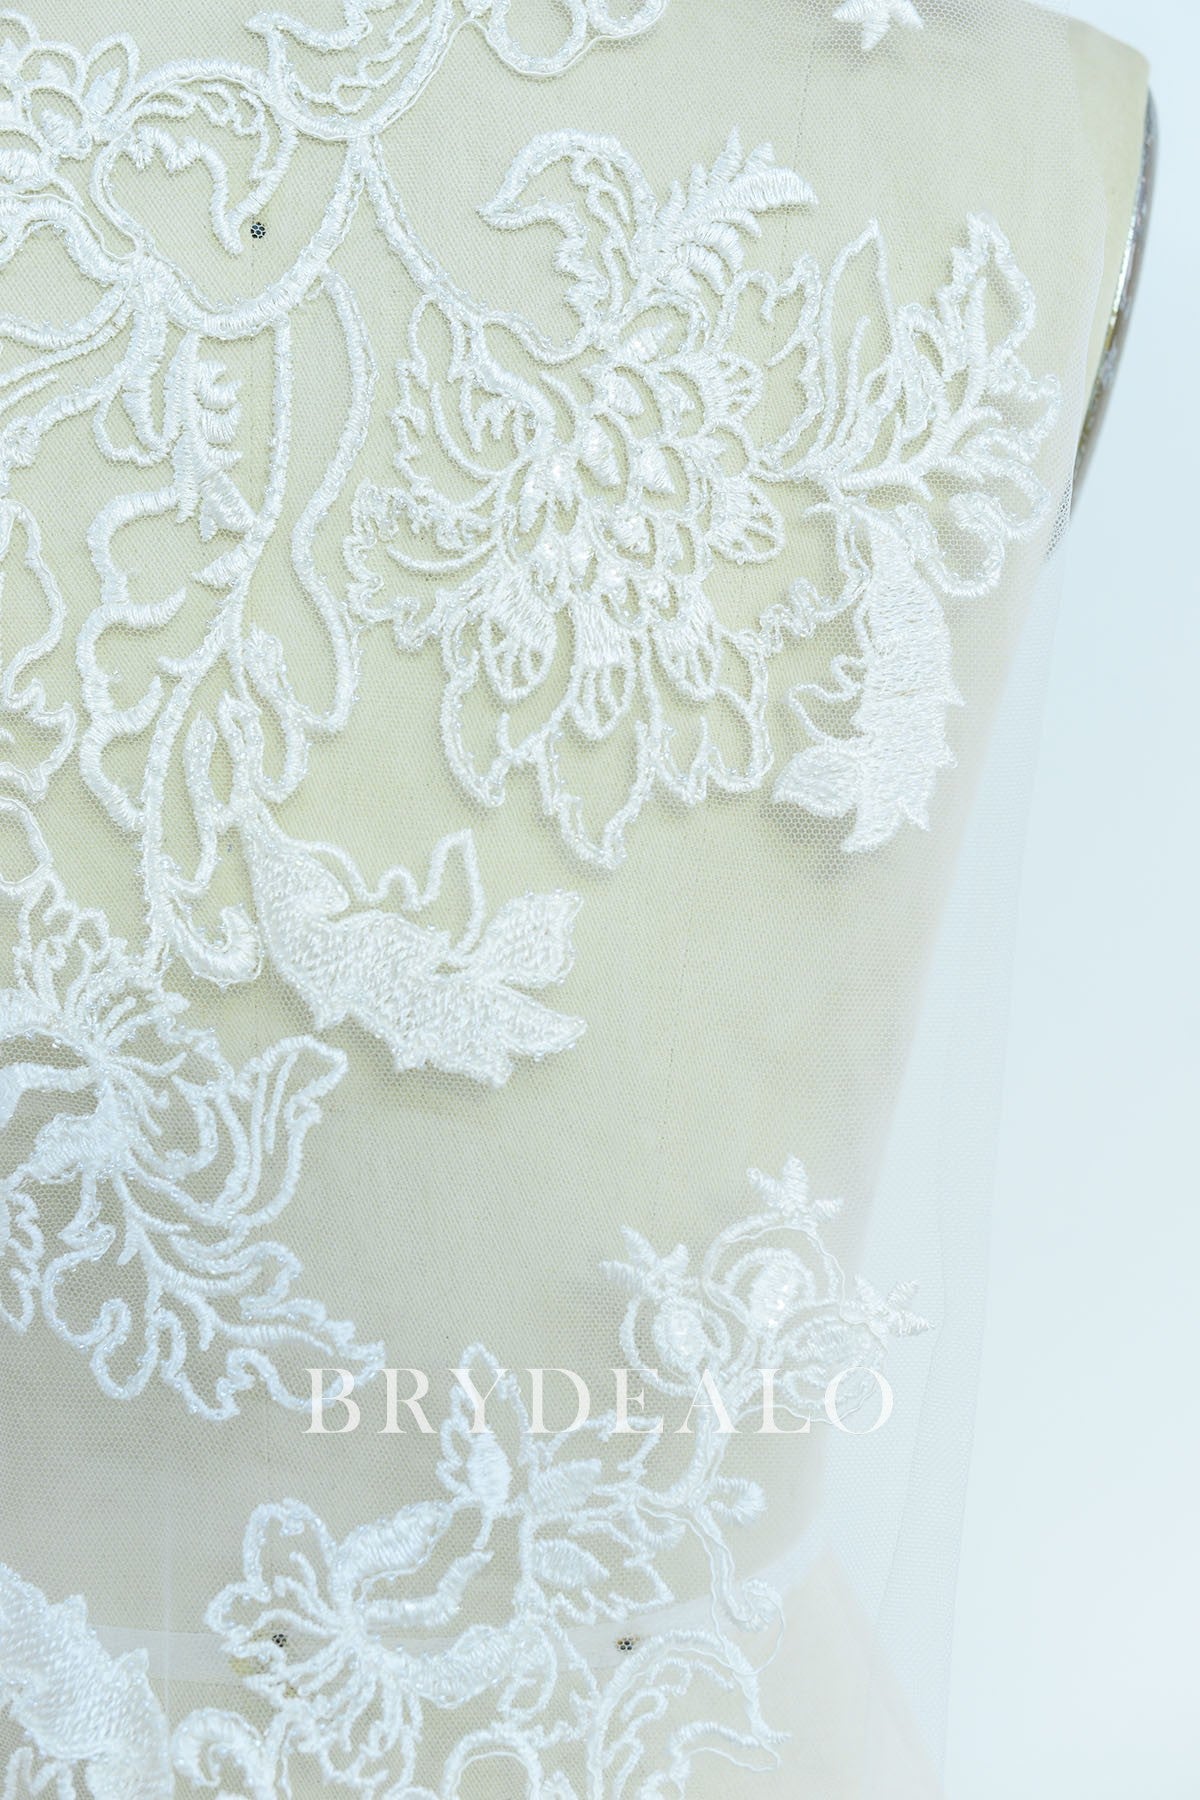 Large Embroidered Flower Lace Fabric with Beading